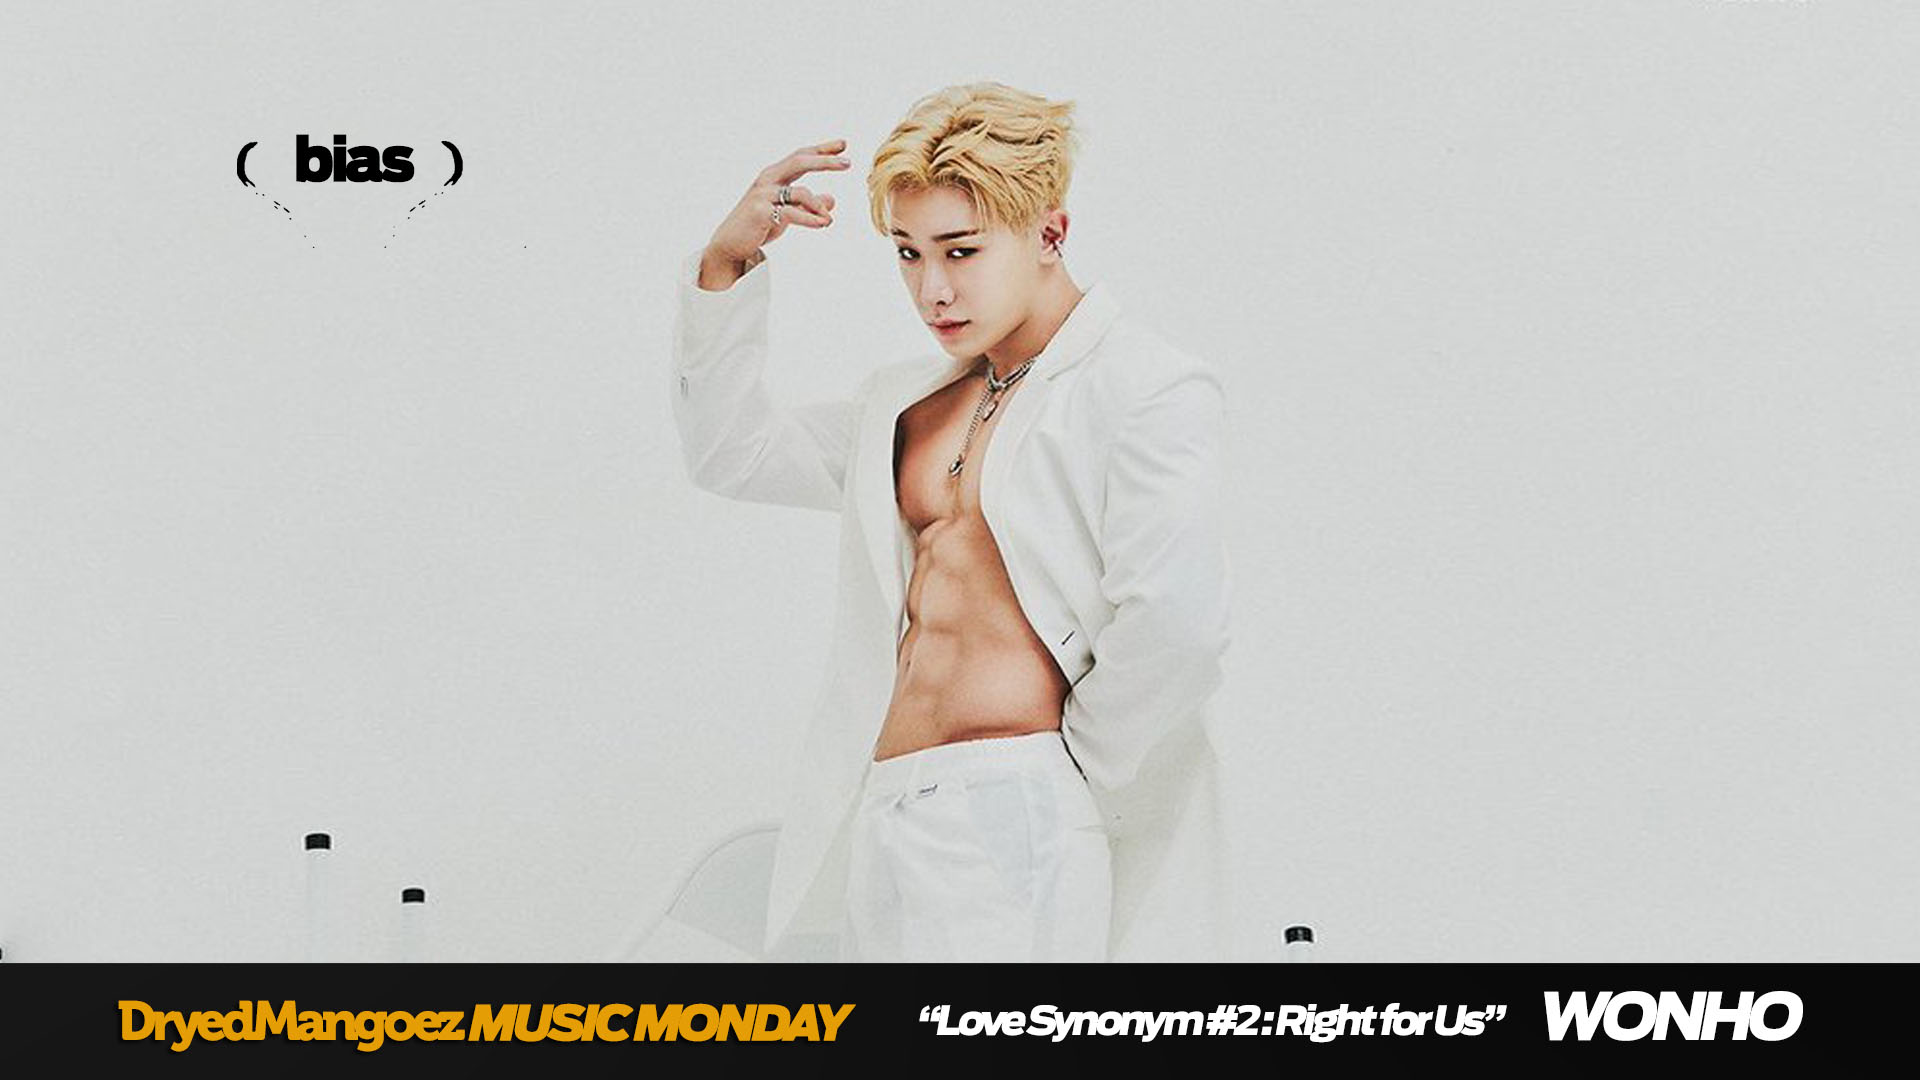 Music Friday(!), February 26, 2021 – Wonho’s Excellent, Fascinating “Lose” Anchors A Strong Follow-Up to Solo Debut